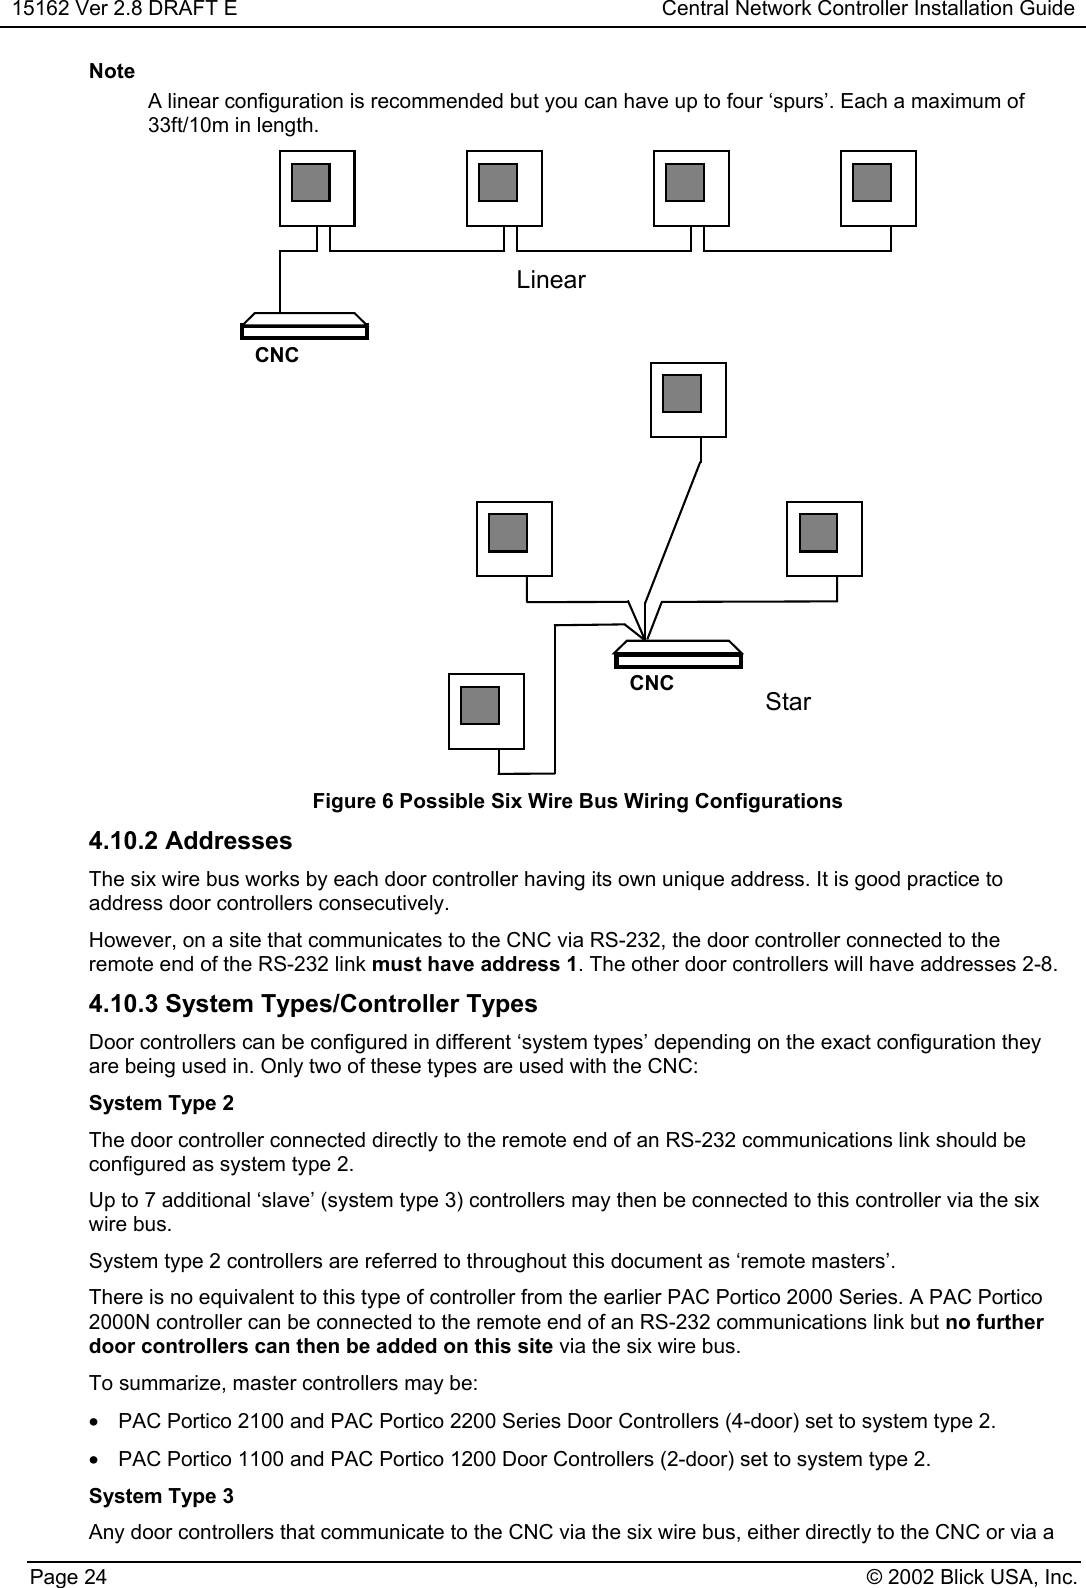 15162 Ver 2.8 DRAFT E Central Network Controller Installation GuidePage 24 © 2002 Blick USA, Inc.NoteA linear configuration is recommended but you can have up to four ‘spurs’. Each a maximum of33ft/10m in length.LinearStarCNCCNCFigure 6 Possible Six Wire Bus Wiring Configurations4.10.2 AddressesThe six wire bus works by each door controller having its own unique address. It is good practice toaddress door controllers consecutively.However, on a site that communicates to the CNC via RS-232, the door controller connected to theremote end of the RS-232 link must have address 1. The other door controllers will have addresses 2-8.4.10.3 System Types/Controller TypesDoor controllers can be configured in different ‘system types’ depending on the exact configuration theyare being used in. Only two of these types are used with the CNC:System Type 2The door controller connected directly to the remote end of an RS-232 communications link should beconfigured as system type 2.Up to 7 additional ‘slave’ (system type 3) controllers may then be connected to this controller via the sixwire bus.System type 2 controllers are referred to throughout this document as ‘remote masters’.There is no equivalent to this type of controller from the earlier PAC Portico 2000 Series. A PAC Portico2000N controller can be connected to the remote end of an RS-232 communications link but no furtherdoor controllers can then be added on this site via the six wire bus.To summarize, master controllers may be:•  PAC Portico 2100 and PAC Portico 2200 Series Door Controllers (4-door) set to system type 2.•  PAC Portico 1100 and PAC Portico 1200 Door Controllers (2-door) set to system type 2.System Type 3Any door controllers that communicate to the CNC via the six wire bus, either directly to the CNC or via a